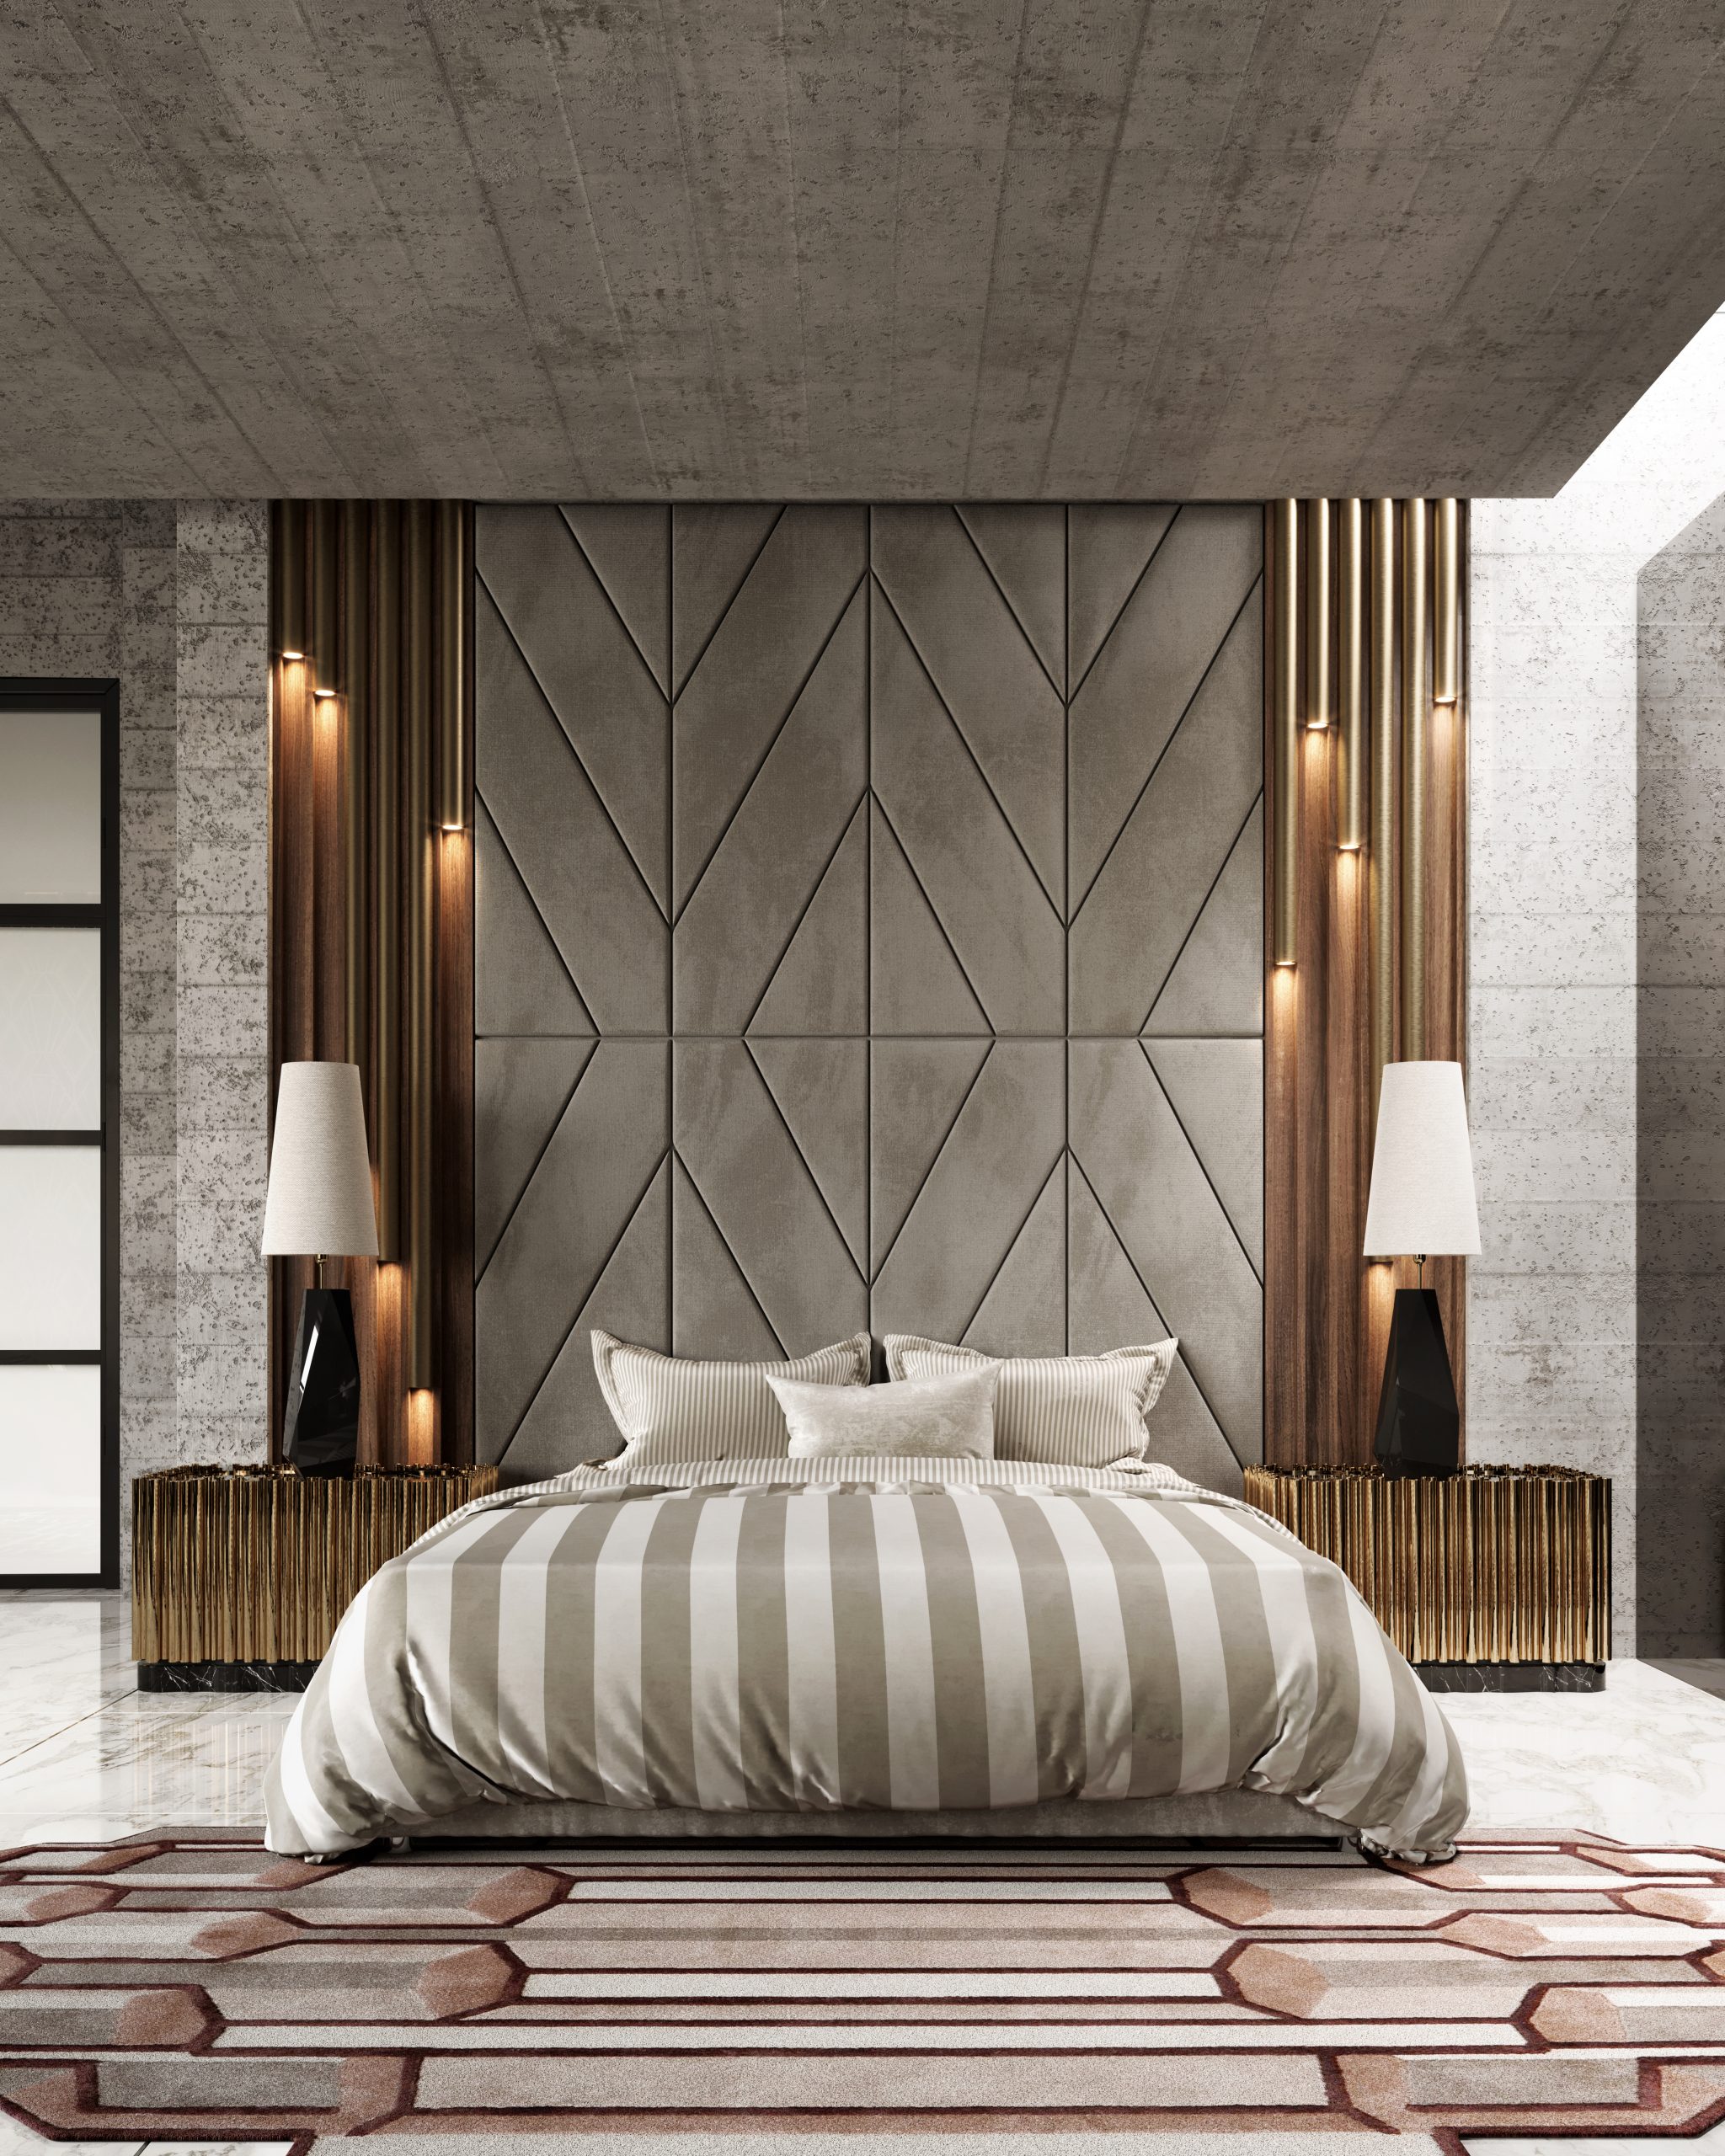 Incredible Luxury Rooms Design Trends 2021-2022 For Your Projects